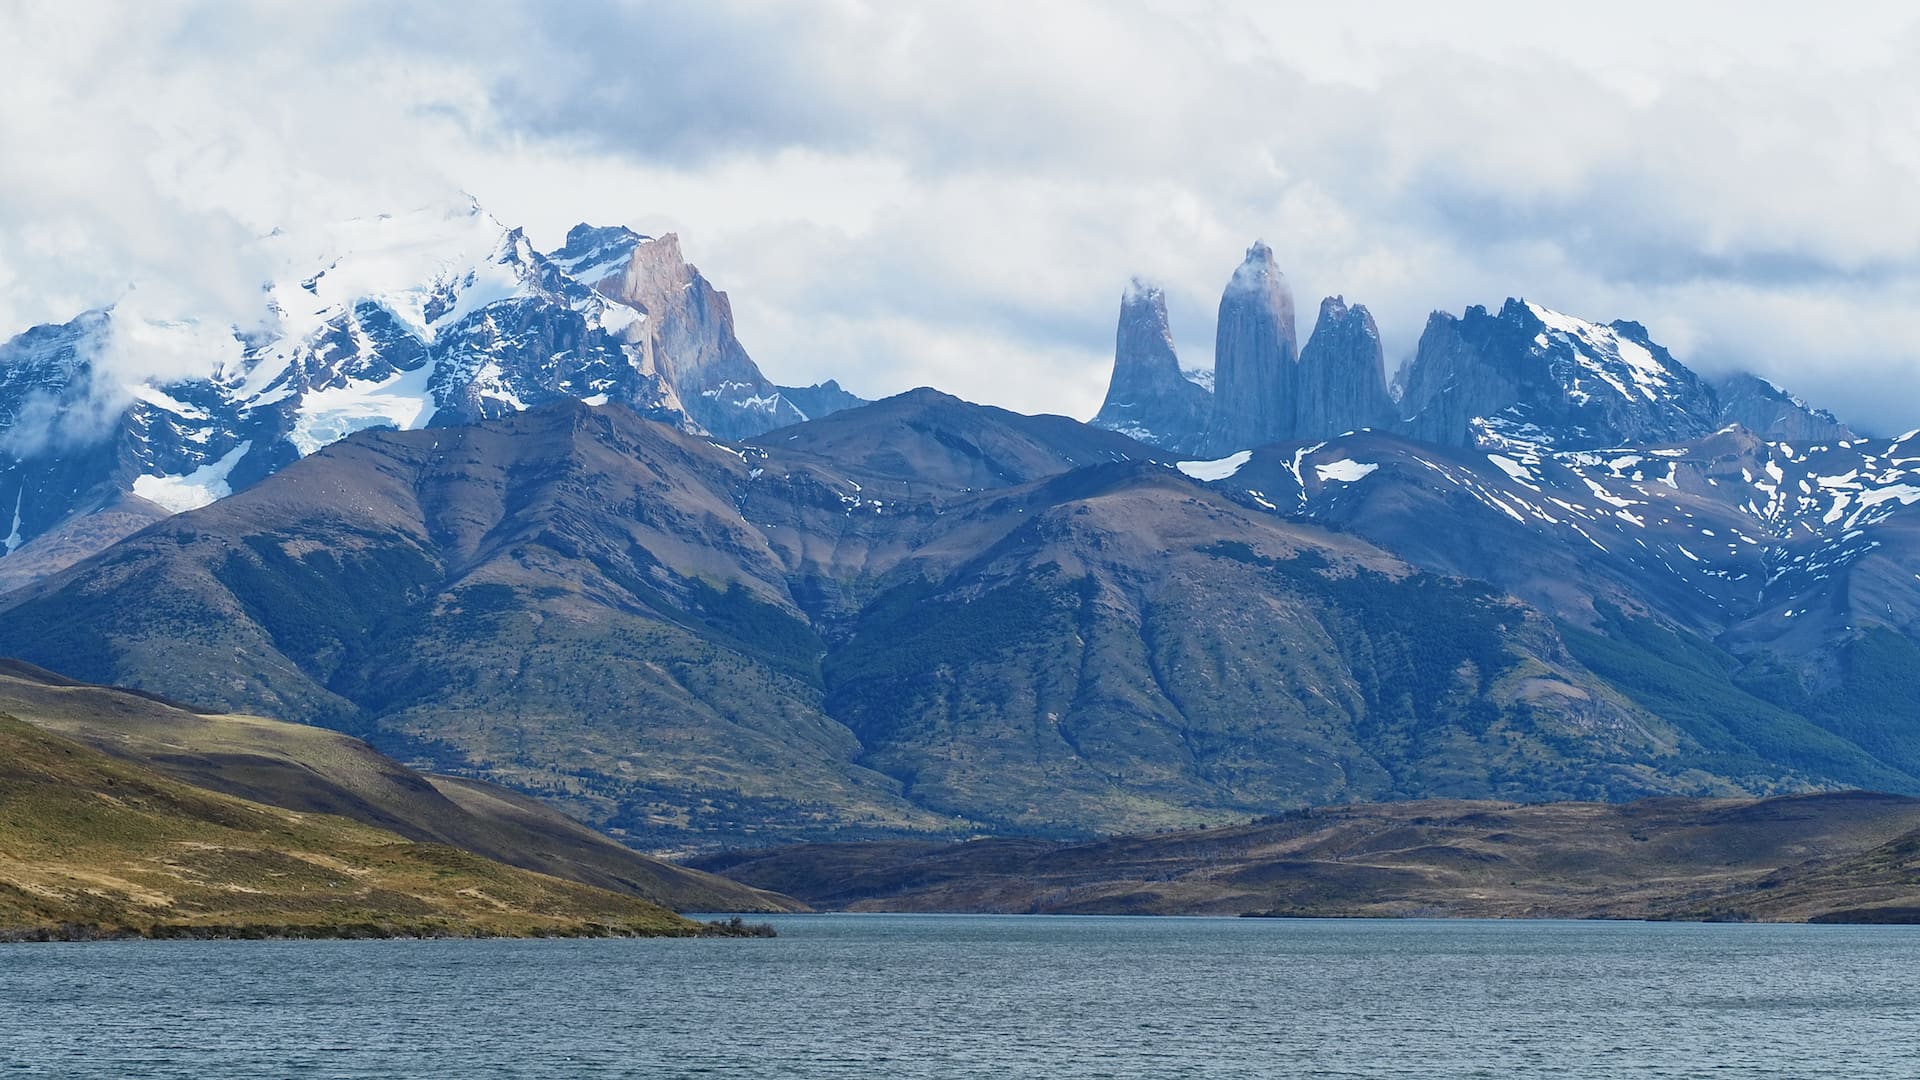 Laguna Azul and the Towers of Paine